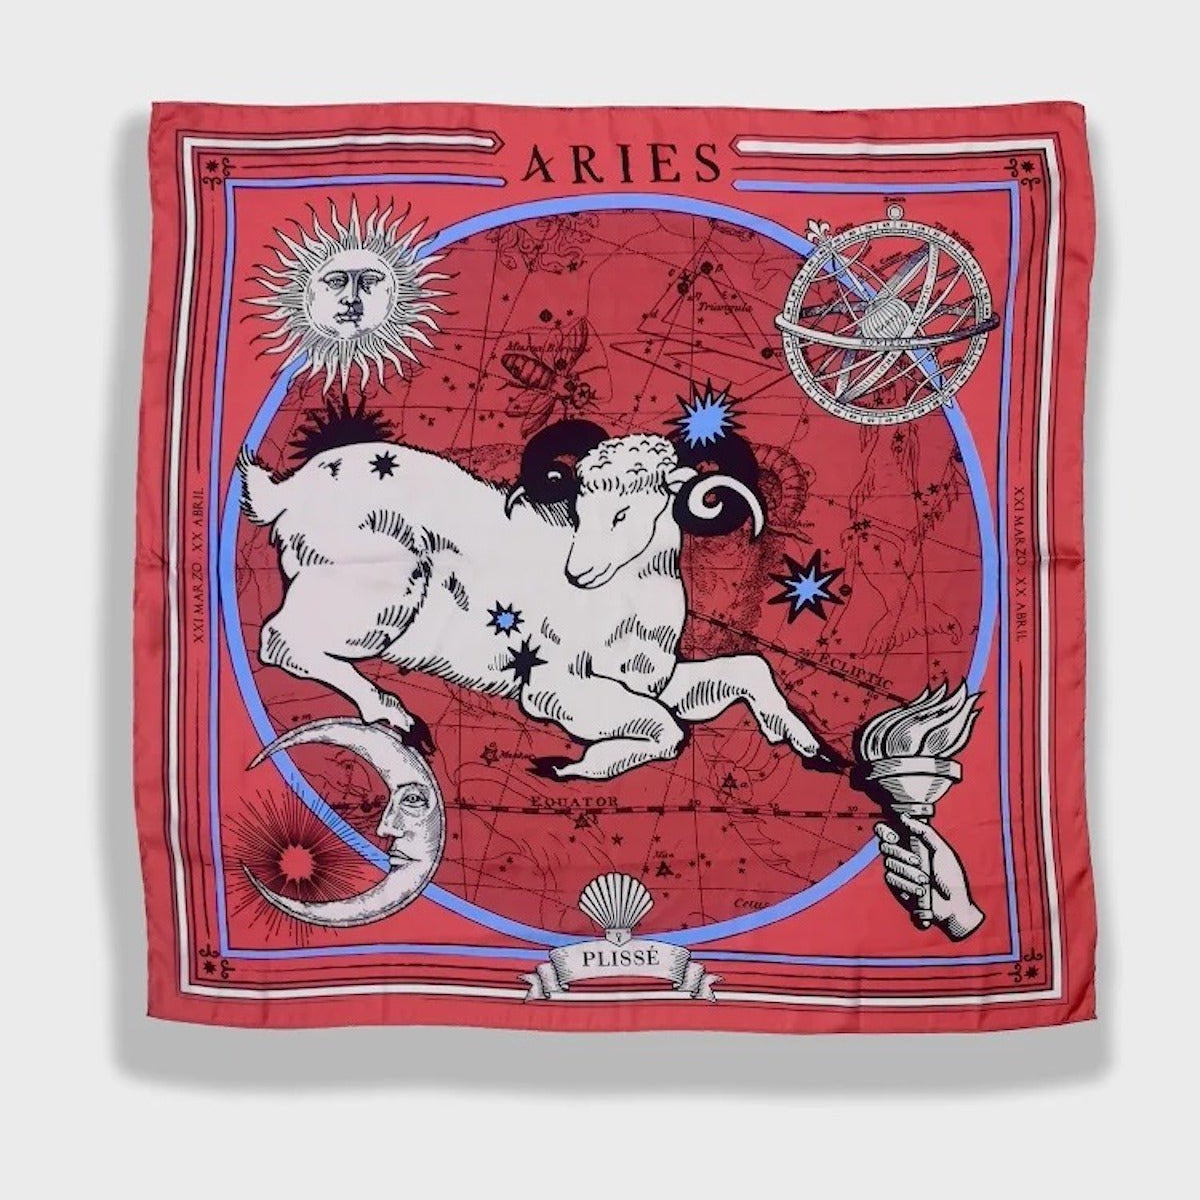 Zodiac Scarf for Aries by Plissé. Red scarf with image of a Ram, sun and moon details, hand holding torch, all on astrological background. Scarf pictured on a white background.